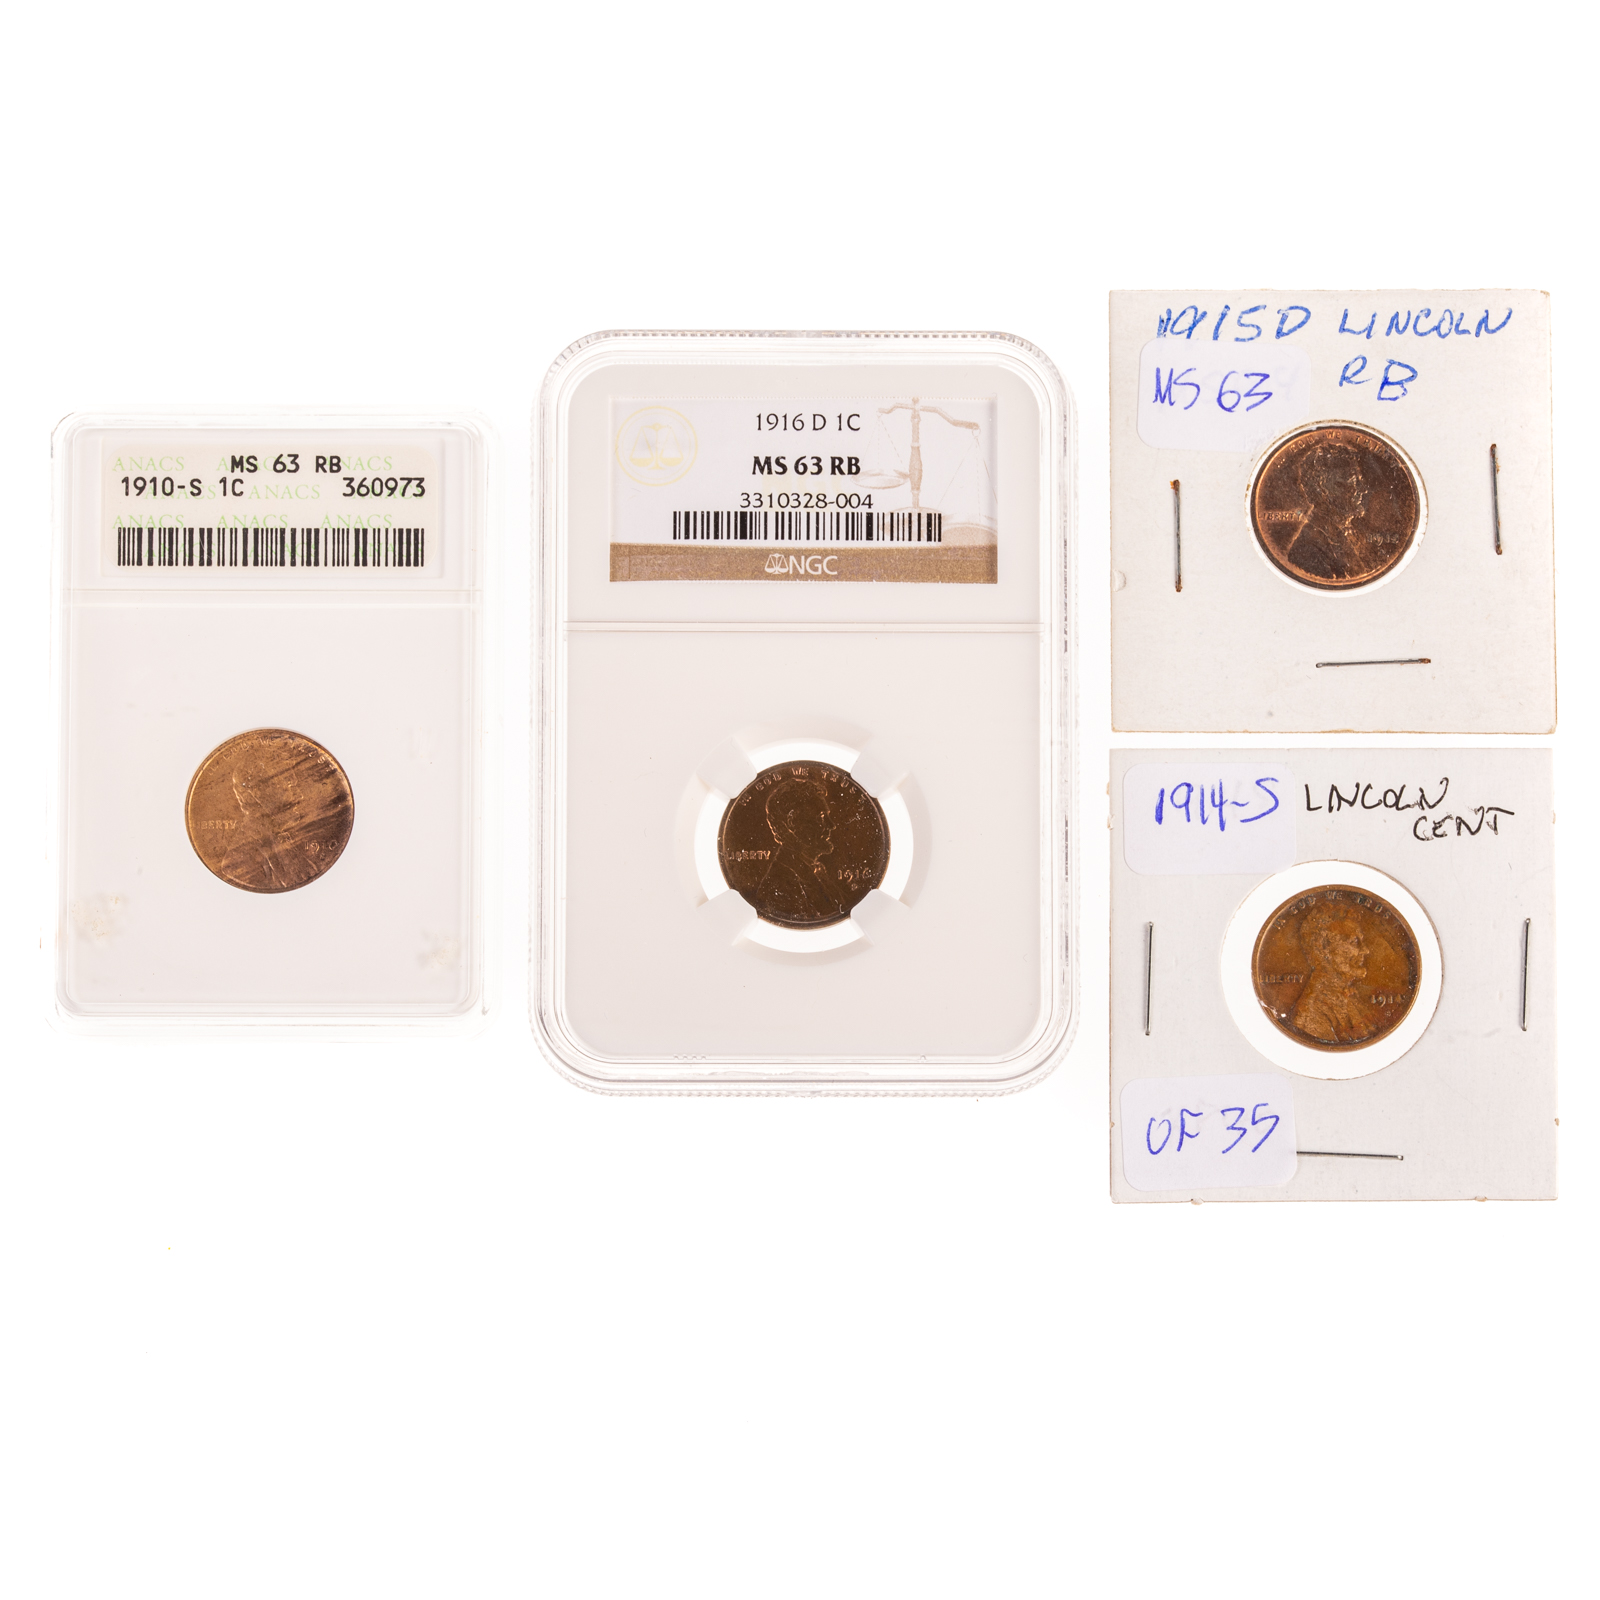 NICE GROUP OF BETTER LINCOLN CENTS